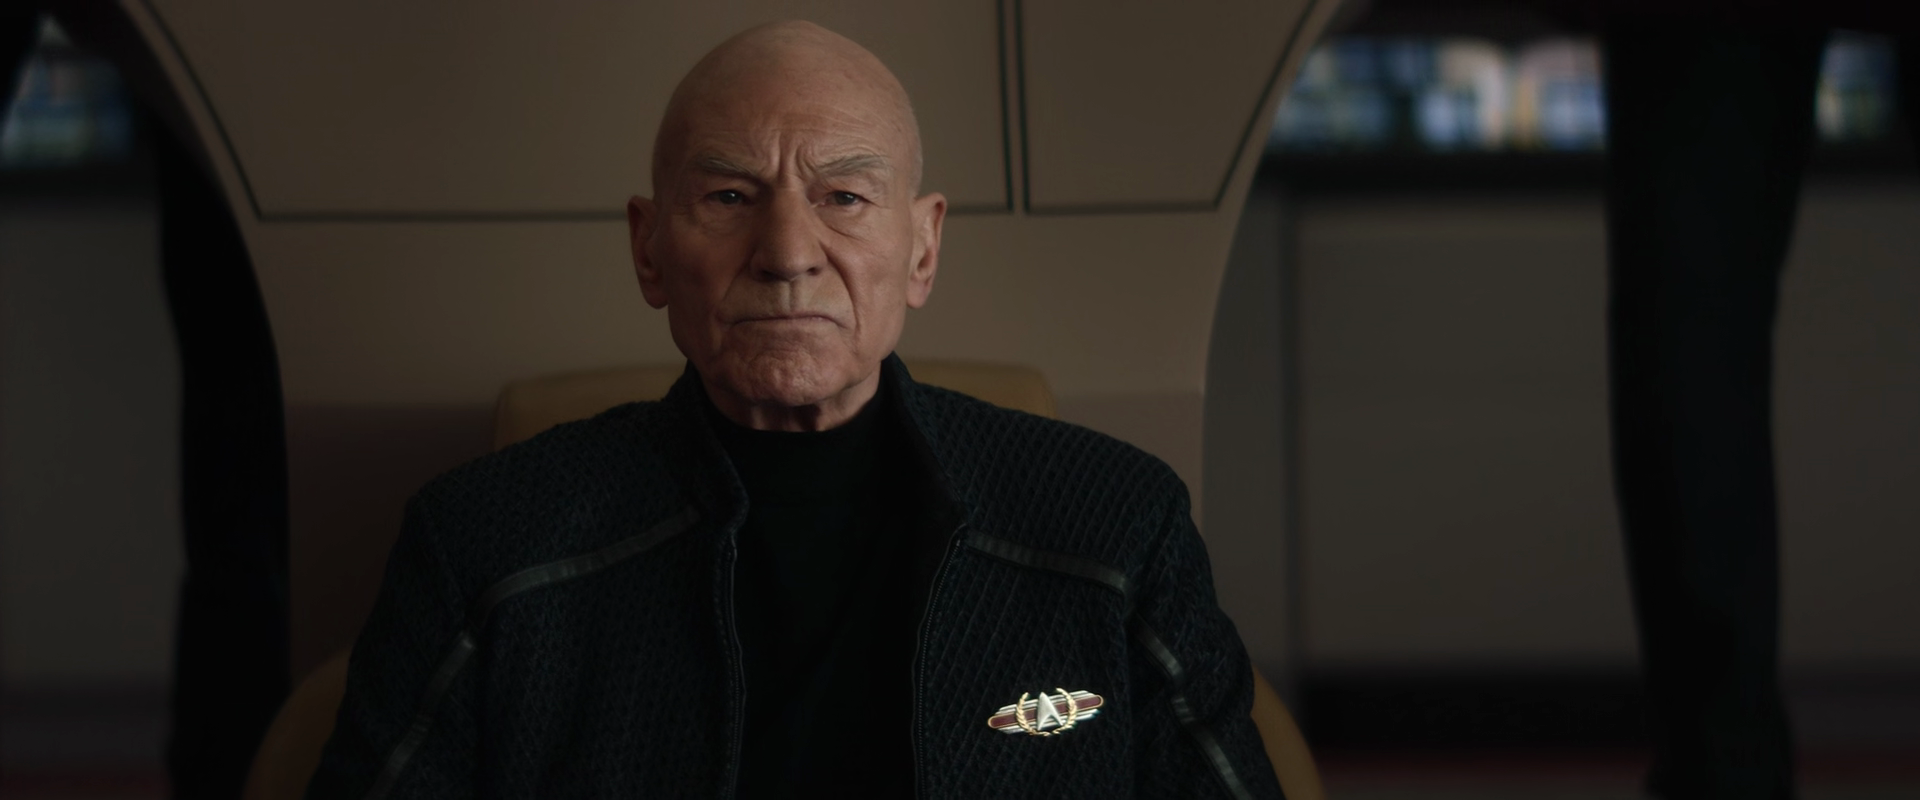 Picard (Patrick Stewart) prepares for a final showdown with the Borg in Star Trek: Picard Season 3 Episode 10 "Et in Arcadia Ego: Part 2" (2023), Paramount